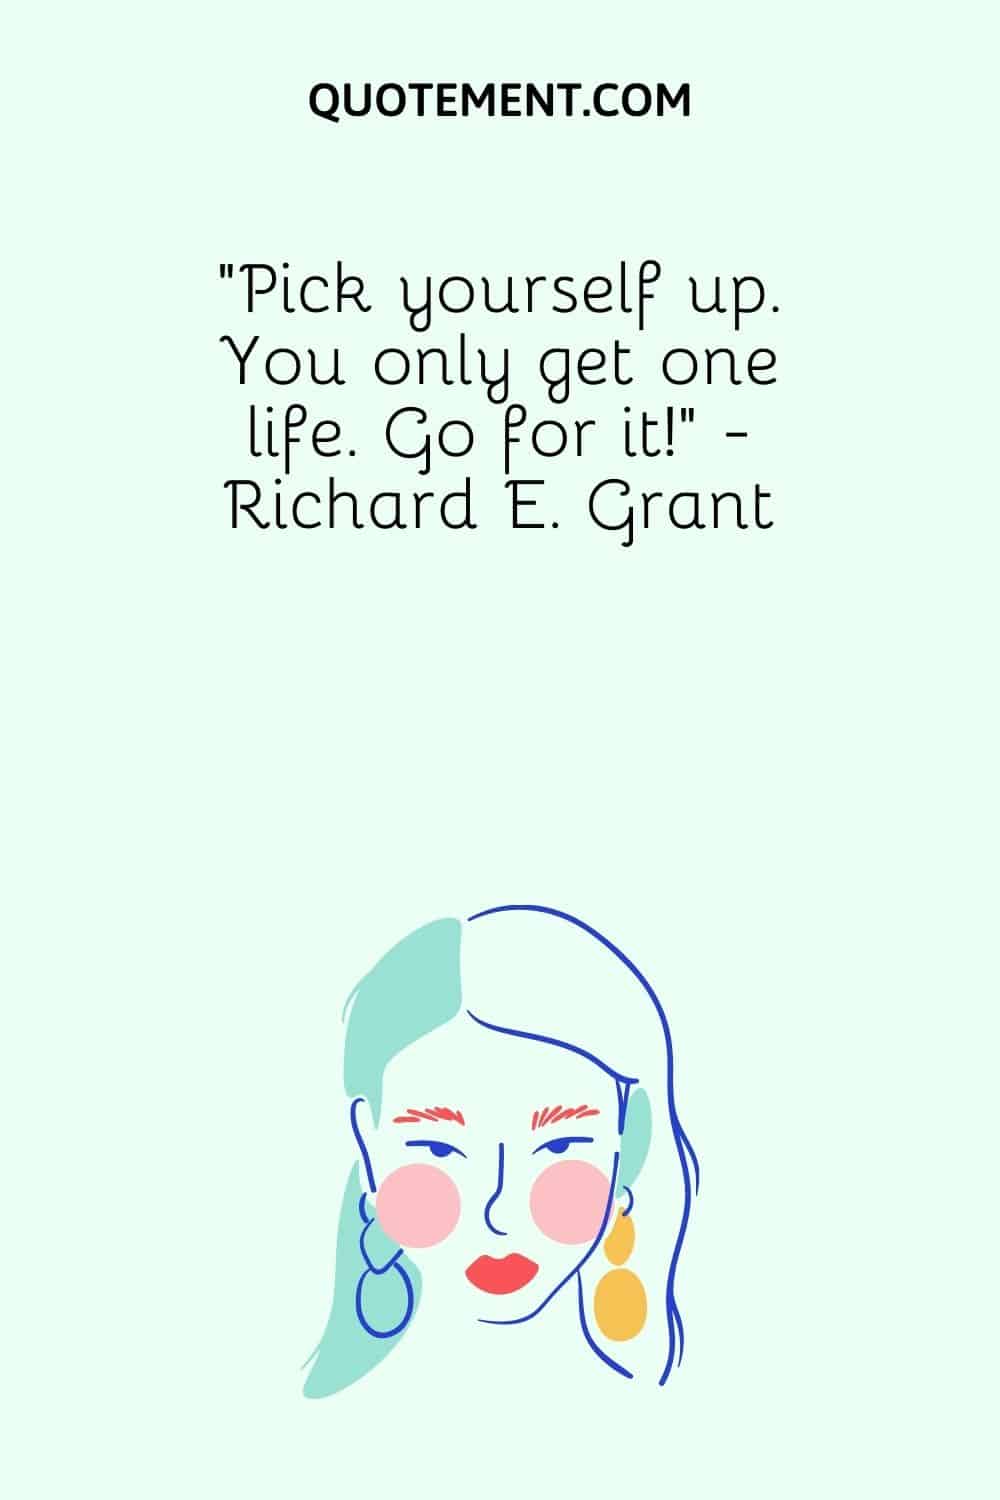 “Pick yourself up. You only get one life. Go for it!” - Richard E. Grant